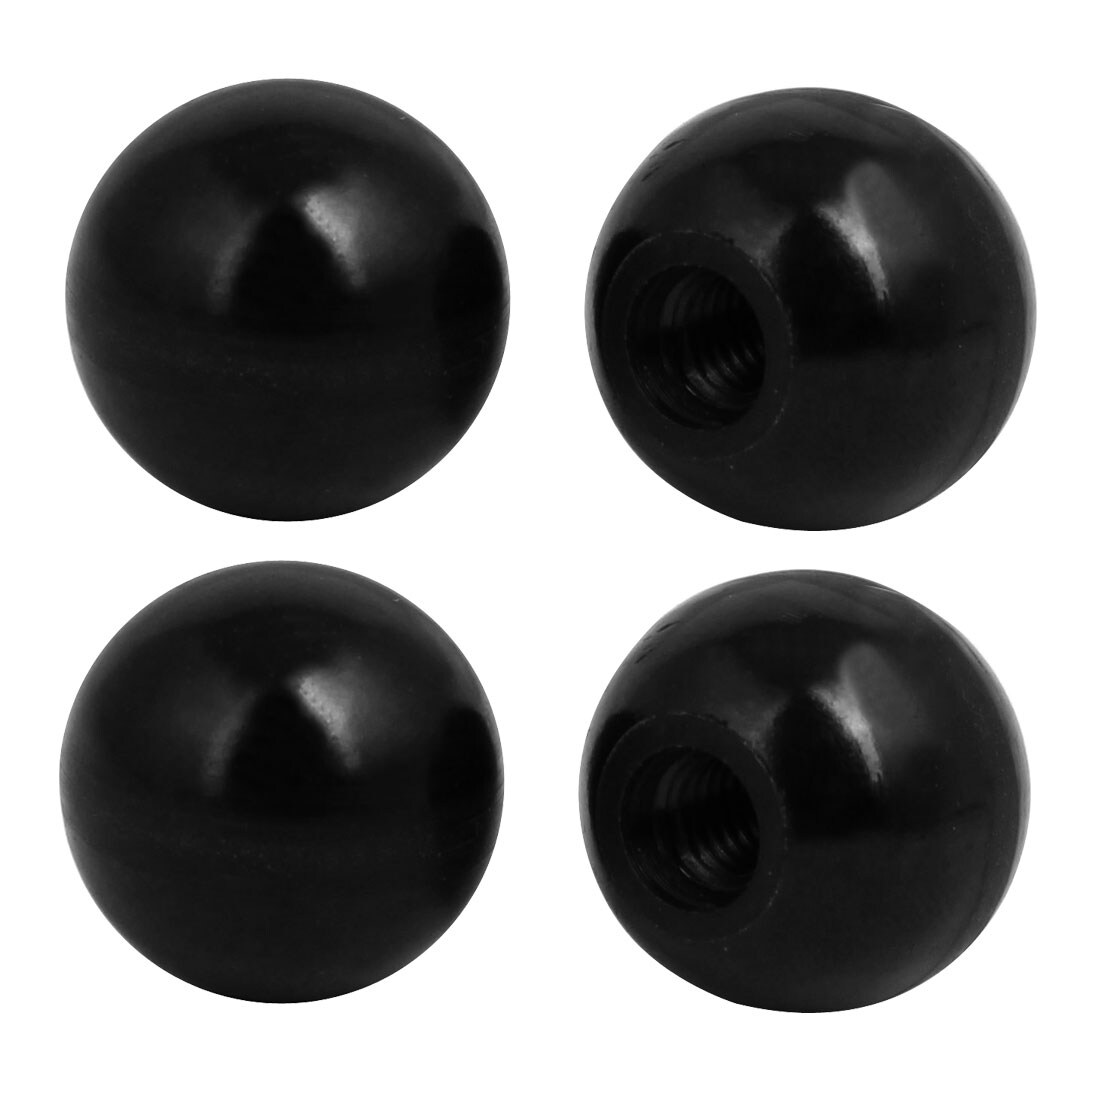 Red 5pcs Inner Diameter 10mm Plastic Ball Thread Knob Ball Lever Knob Threaded Ball Handle Knob Accessories for Arcade Game for Machine Tools 